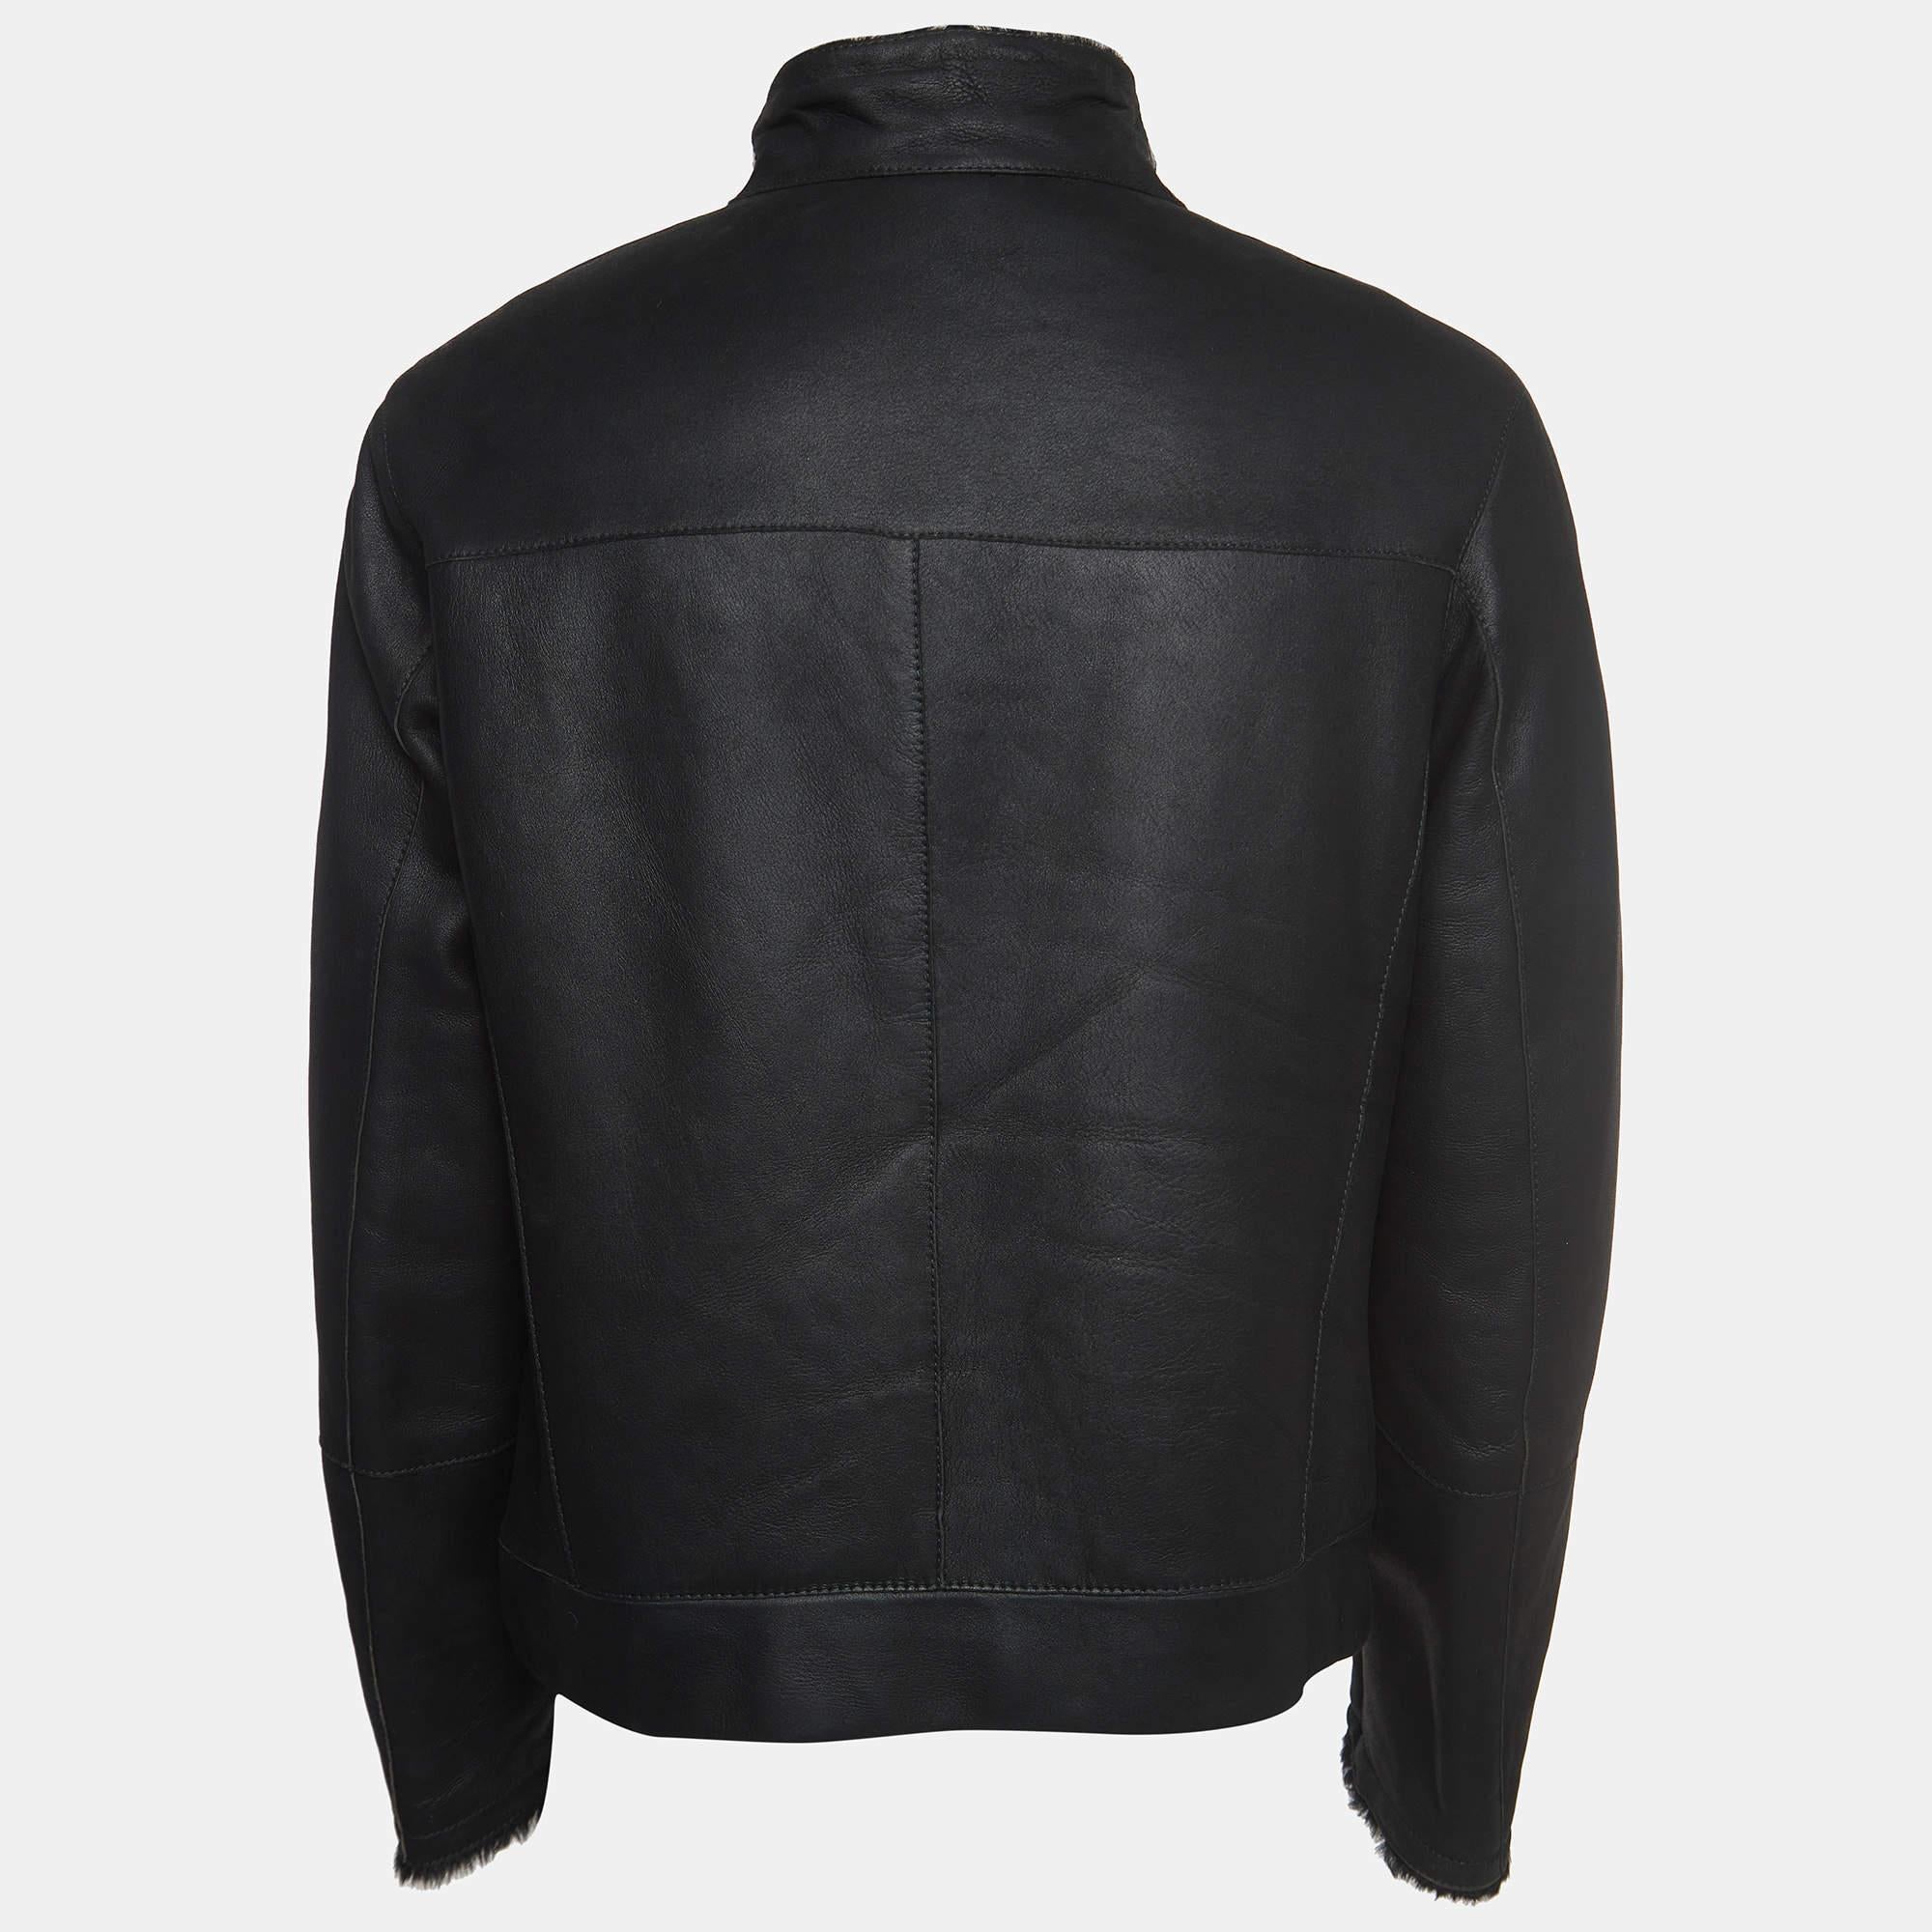 The Giorgio Armani jacket exude sophistication and luxury. Crafted from premium black leather, it features a sleek zipper design and opulent fur detailing. This statement piece seamlessly blends edgy style with timeless elegance, making it a